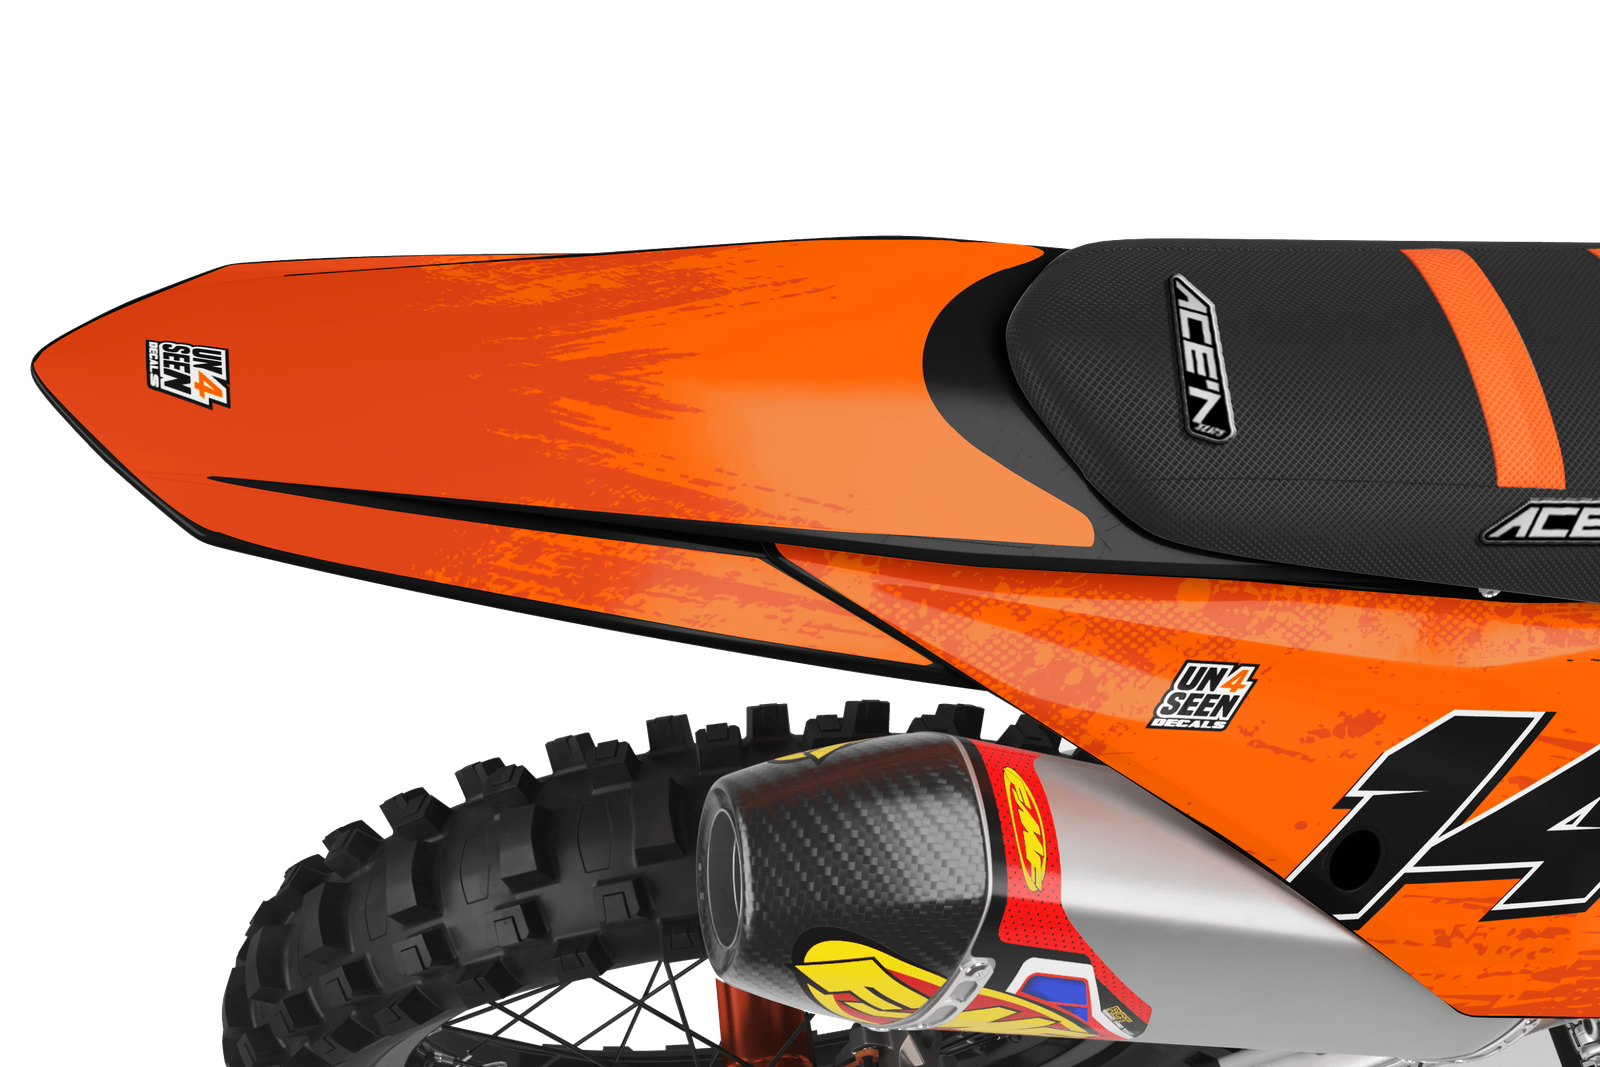 KTM  Moaning Monsters Graphics Kit - Starlight Slop